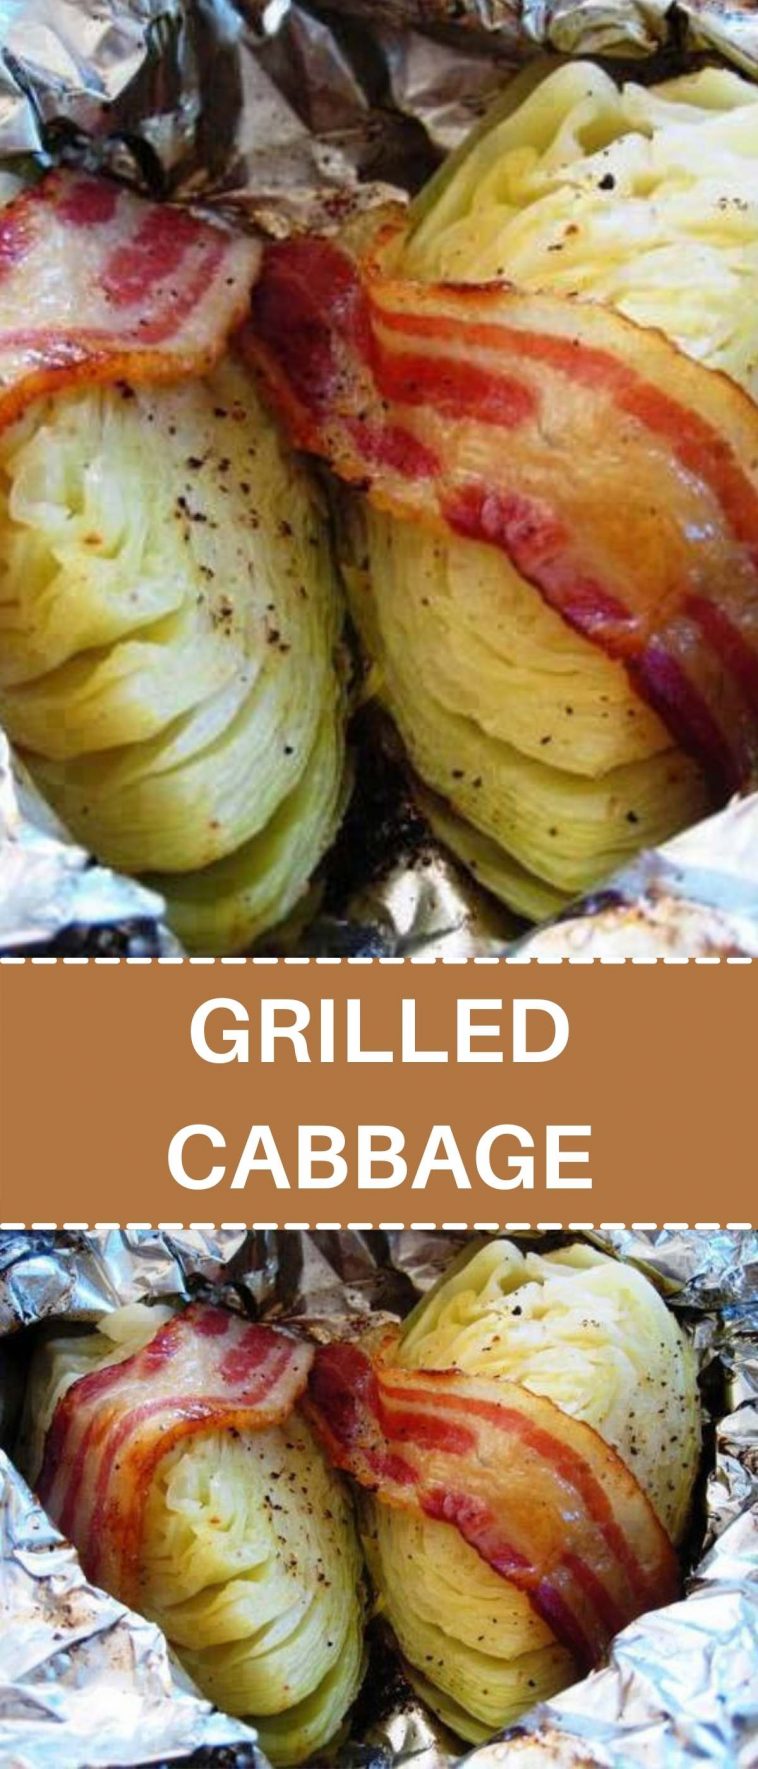 GRILLED CABBAGE